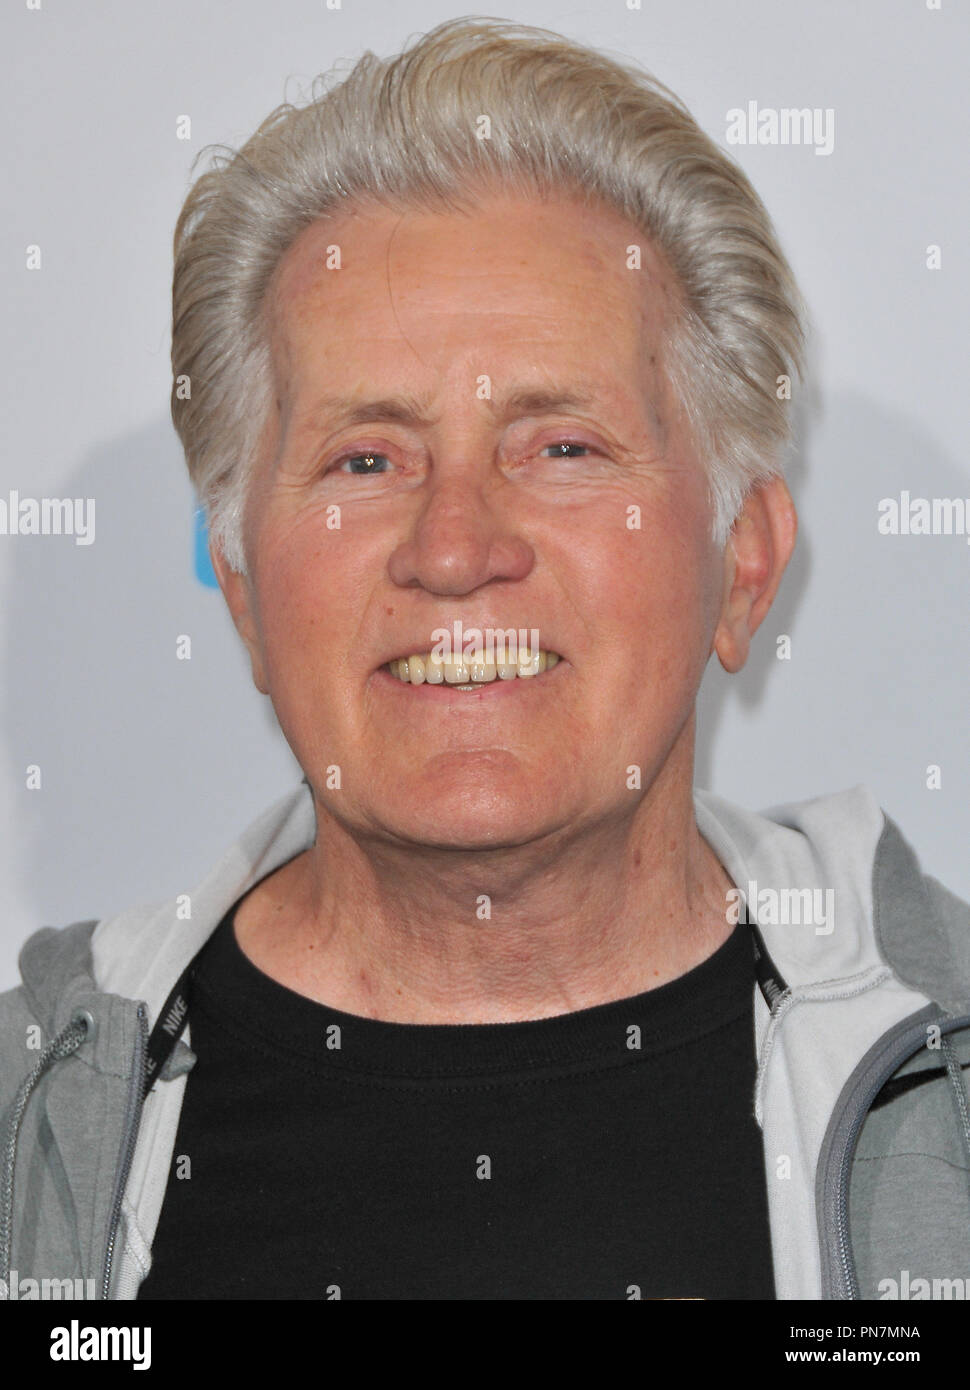 Martin Sheen at WE Day California held at The Forum in Inglewood, CA on Thursday, April 7, 2016. Photo by PRPP PRPP / PictureLux  File Reference # 32880 029PRPP01  For Editorial Use Only -  All Rights Reserved Stock Photo